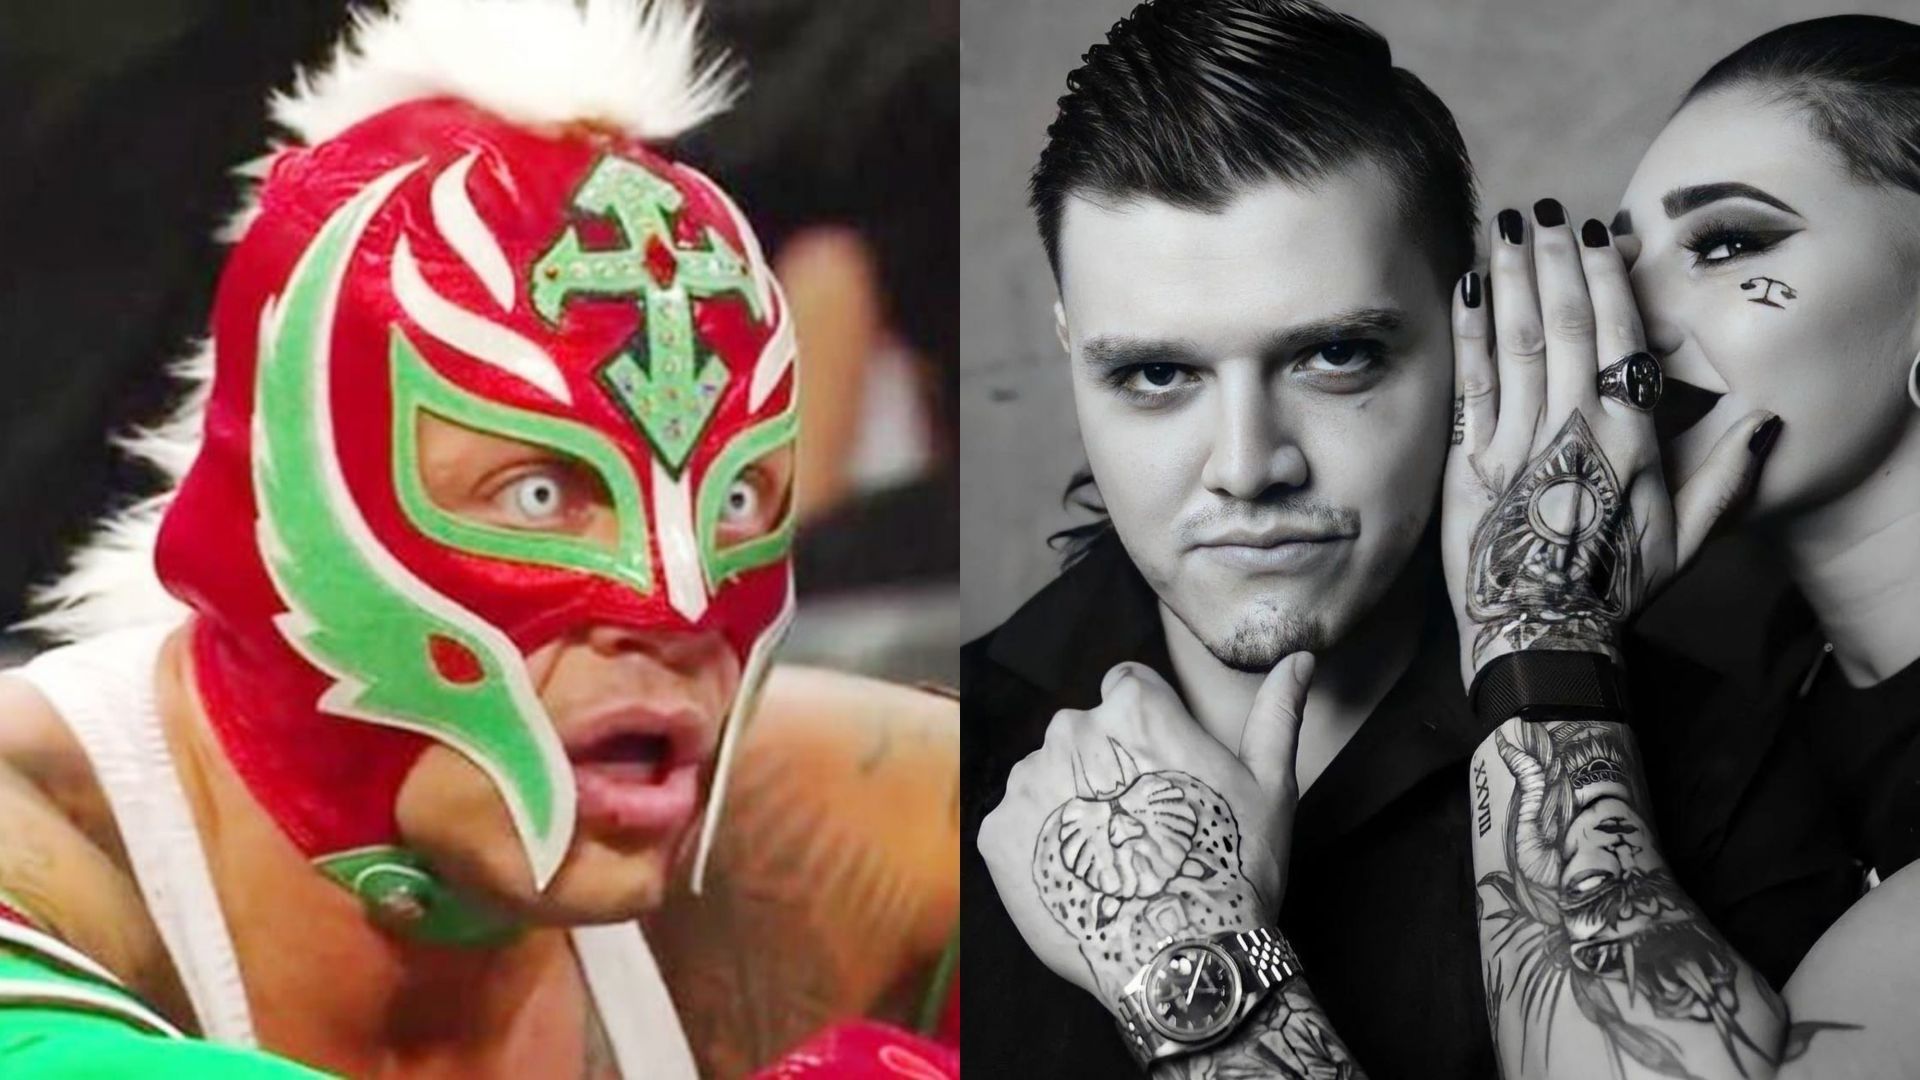 Rey Mysterio addressed his relationship with his son, Dominik